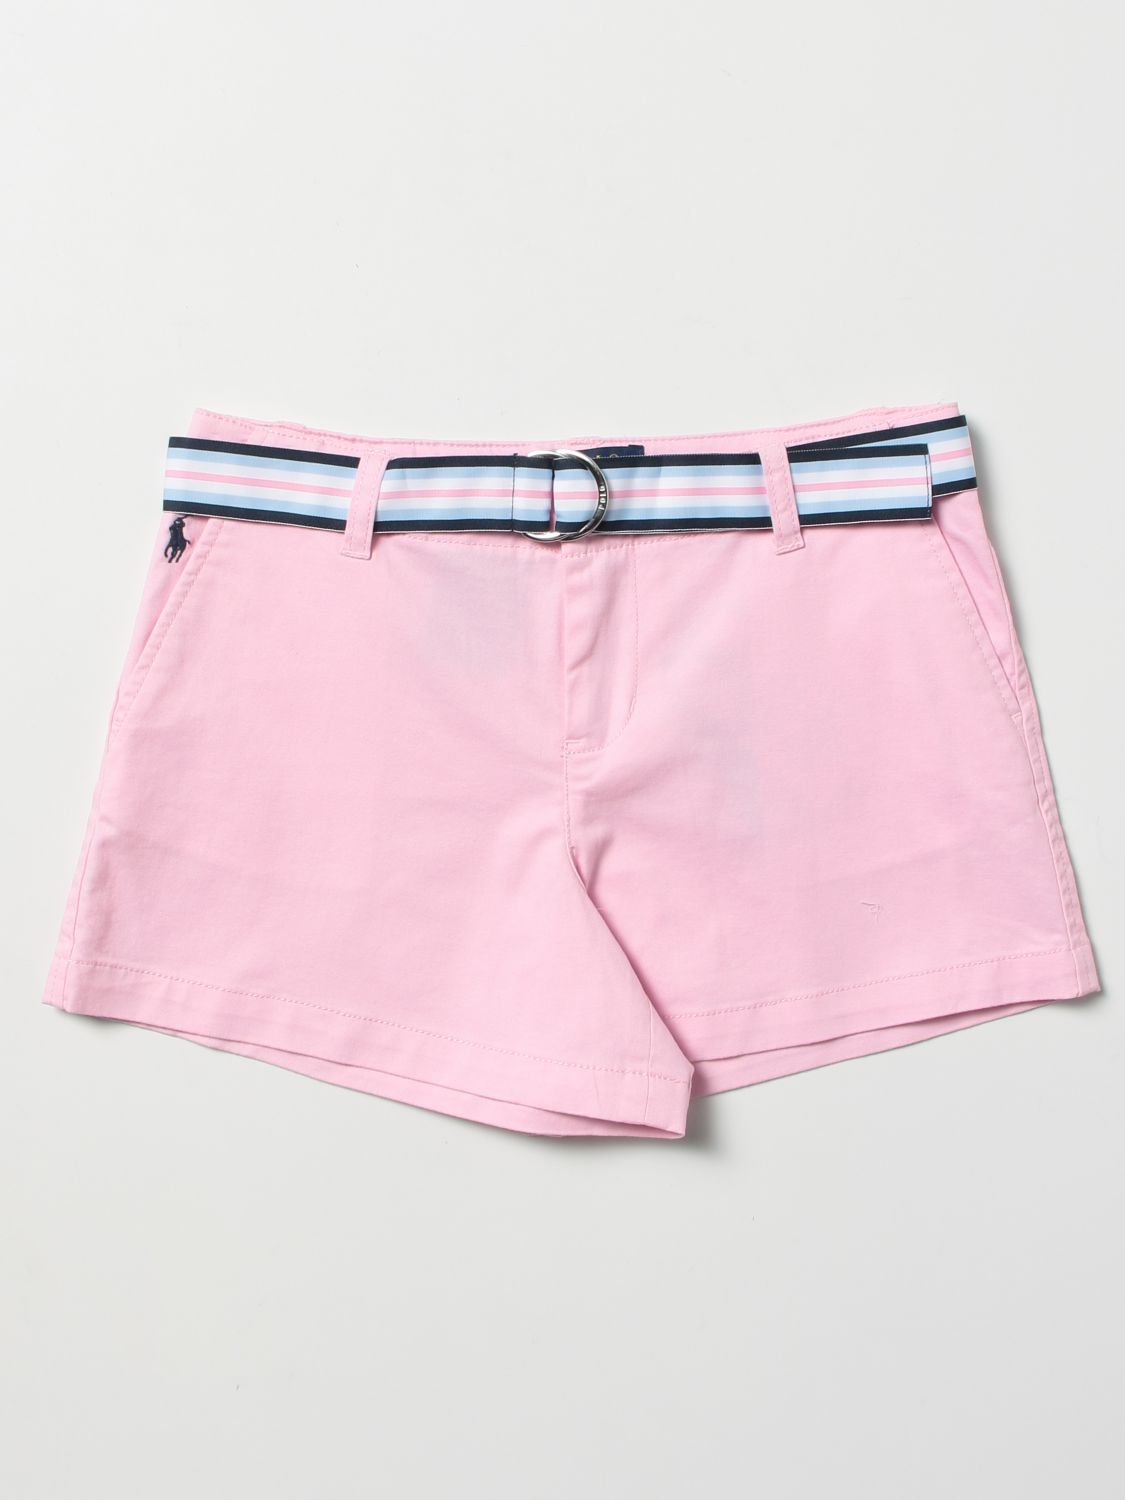 Short Polo Ralph Lauren: Polo Ralph Lauren short for girls pink 1